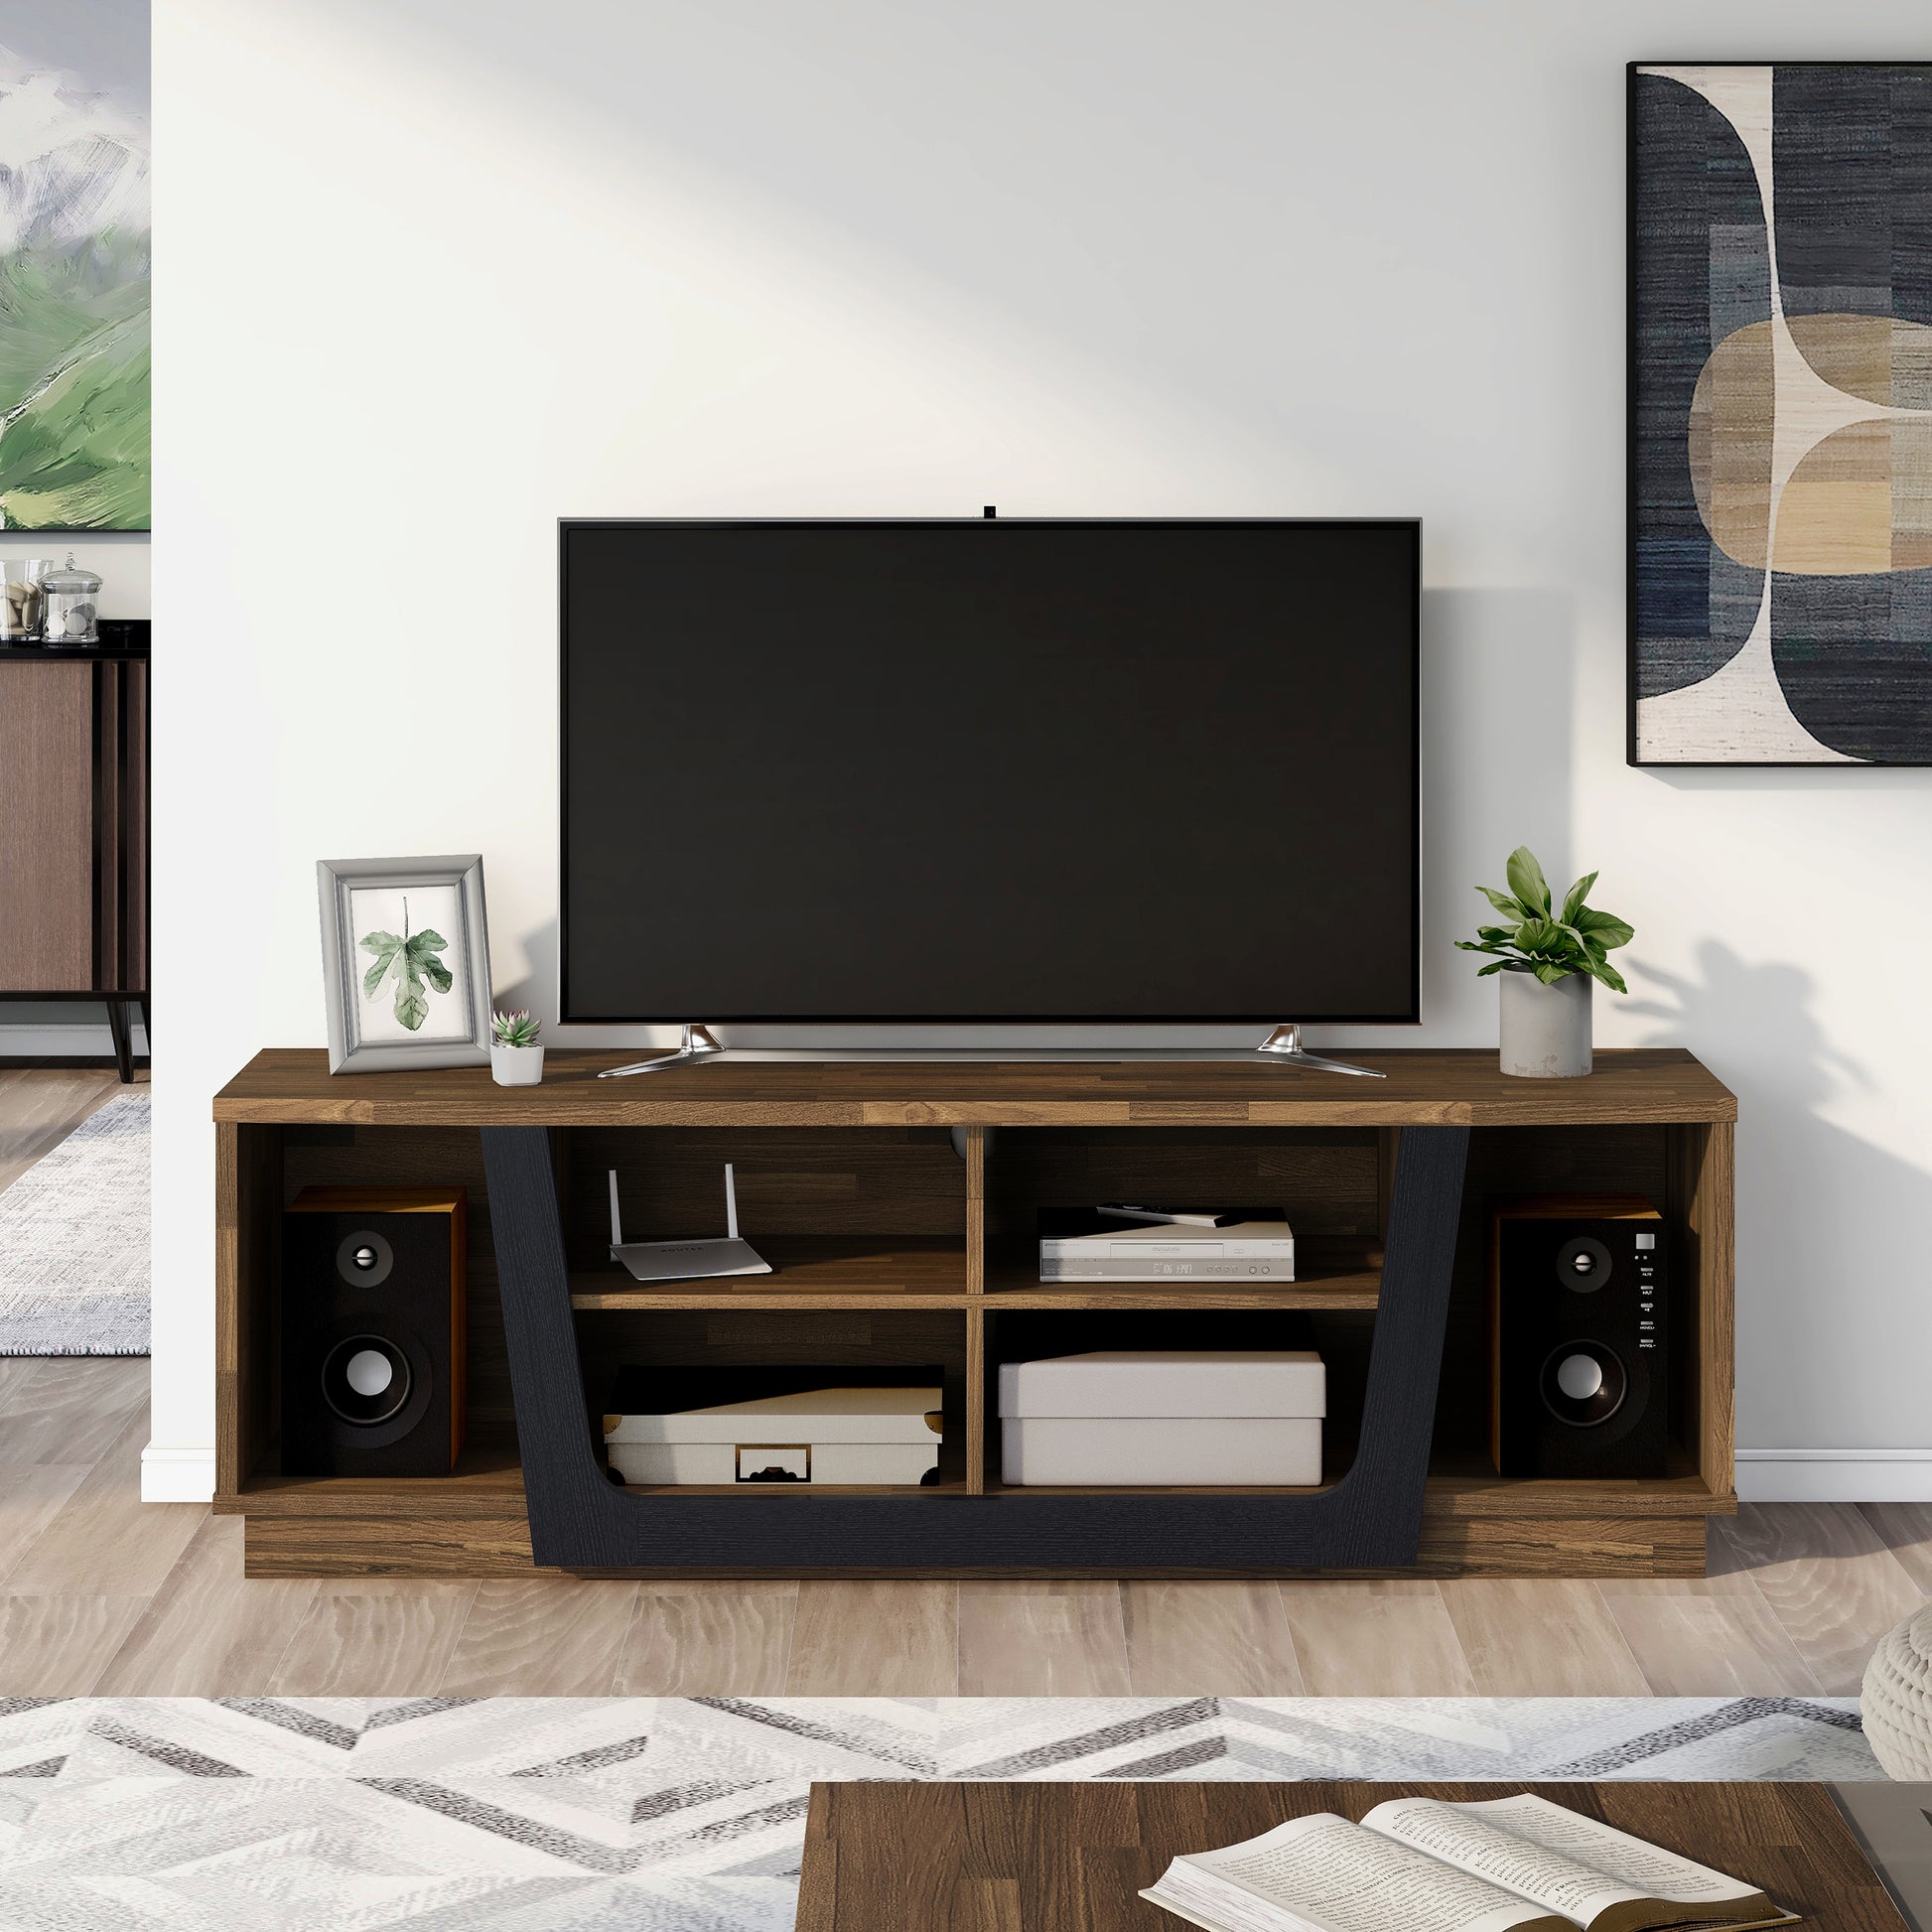 Front-facing contemporary light hickory and black six-shelf TV stand in a living room with accessories